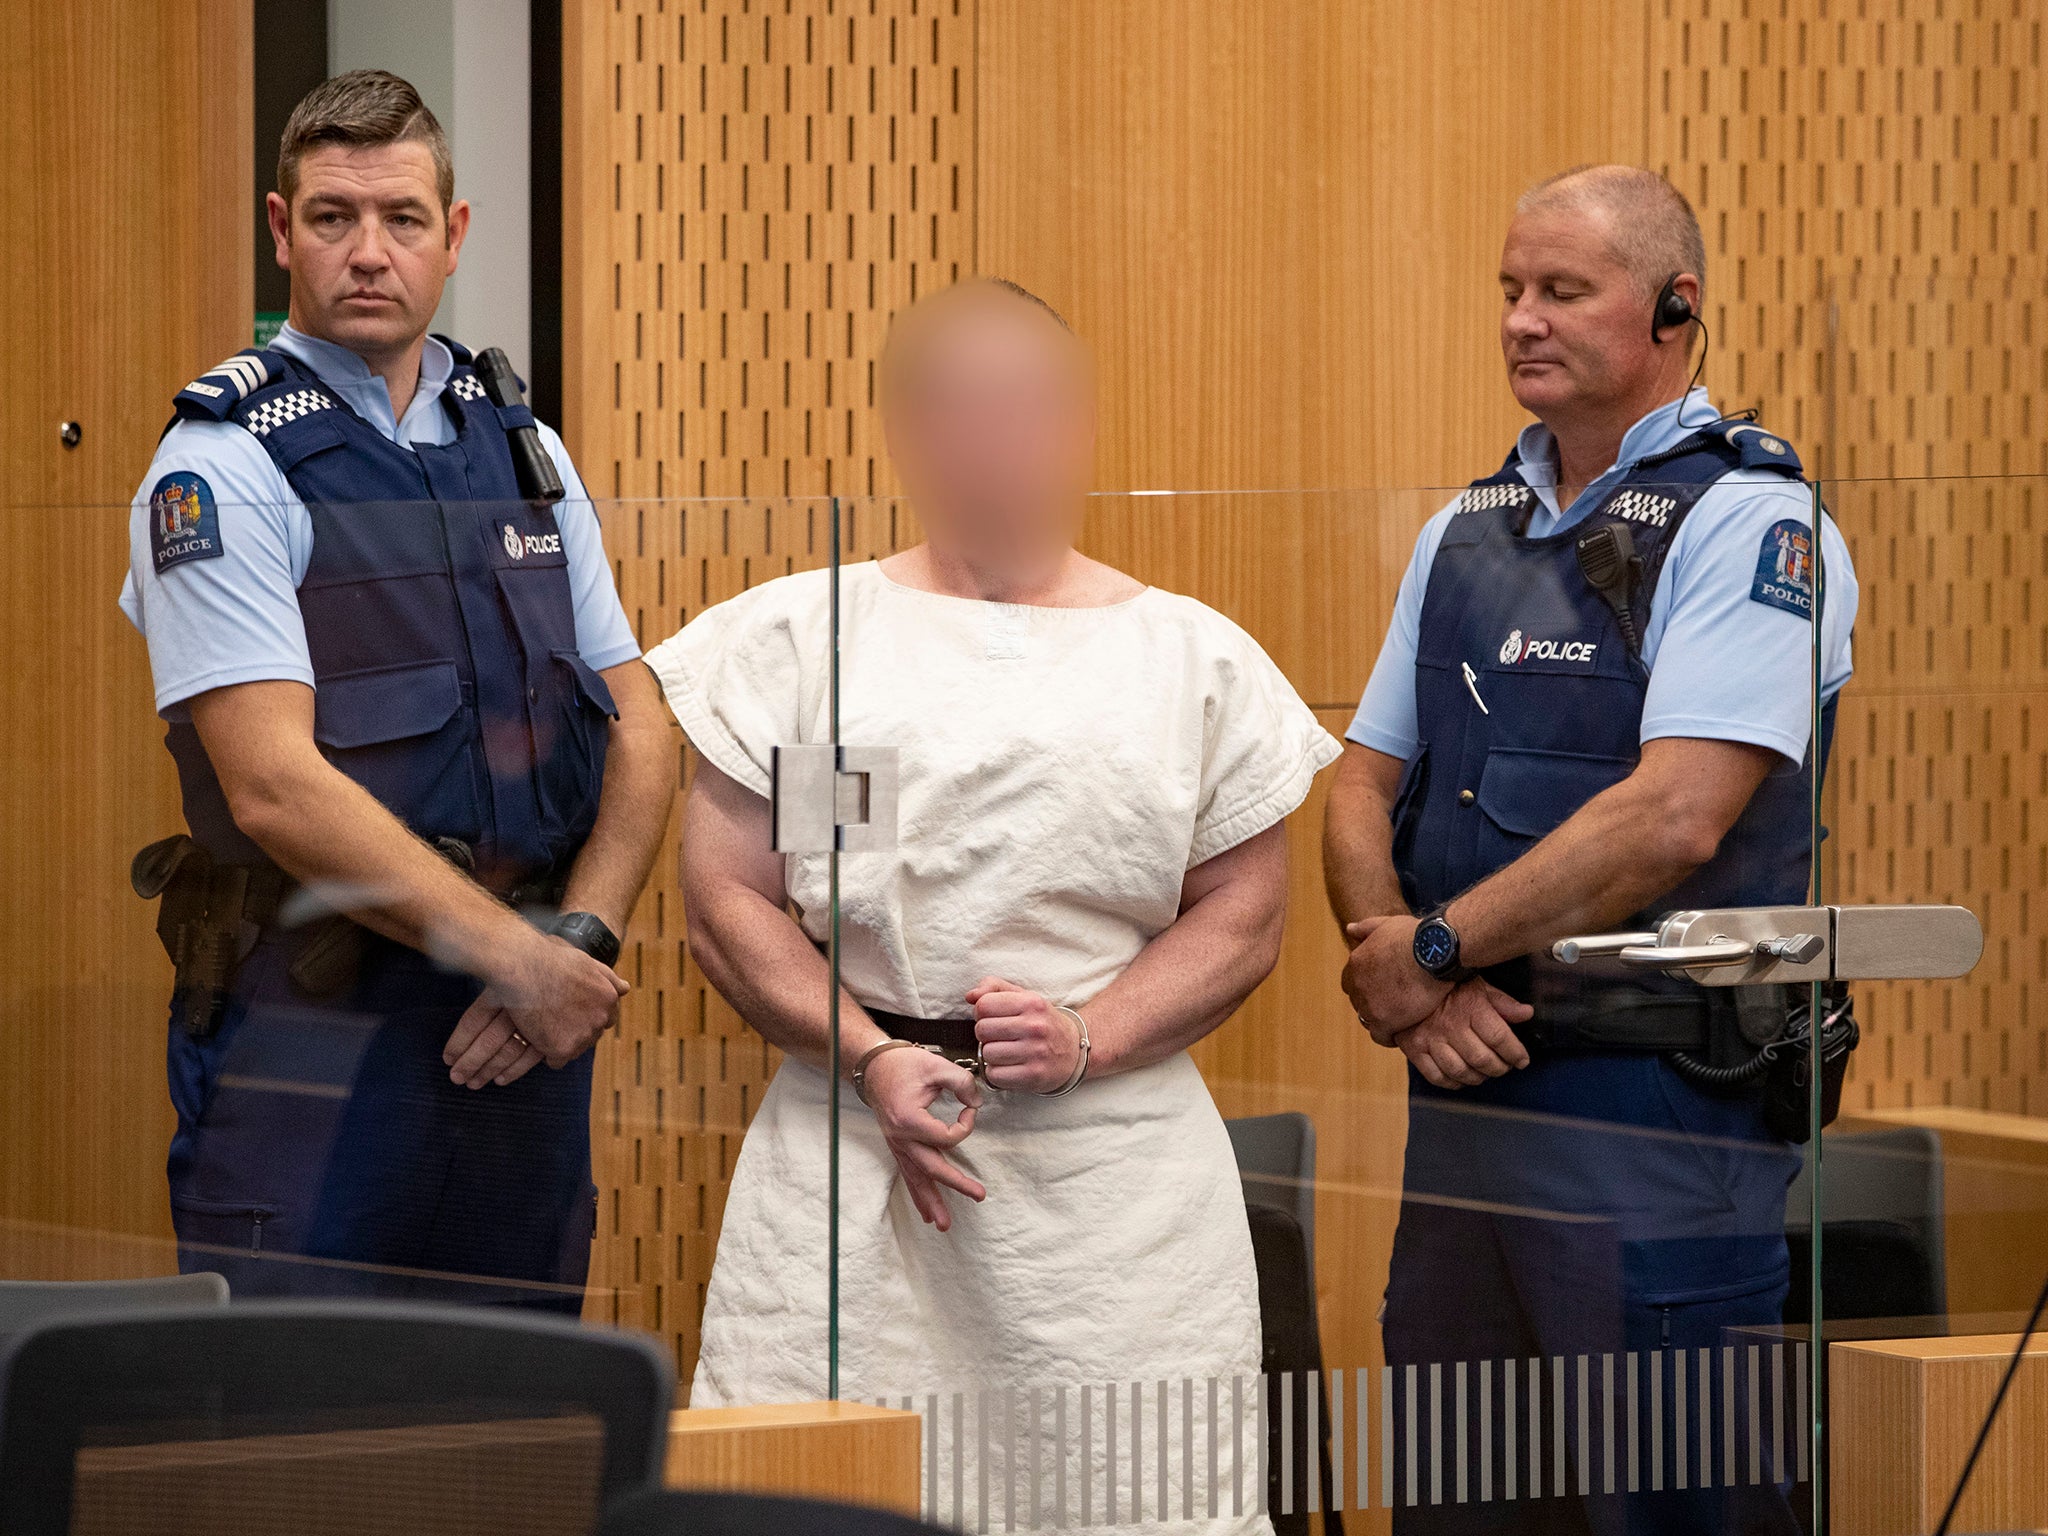 Brenton Tarrant made the symbol at his trial earlier this year